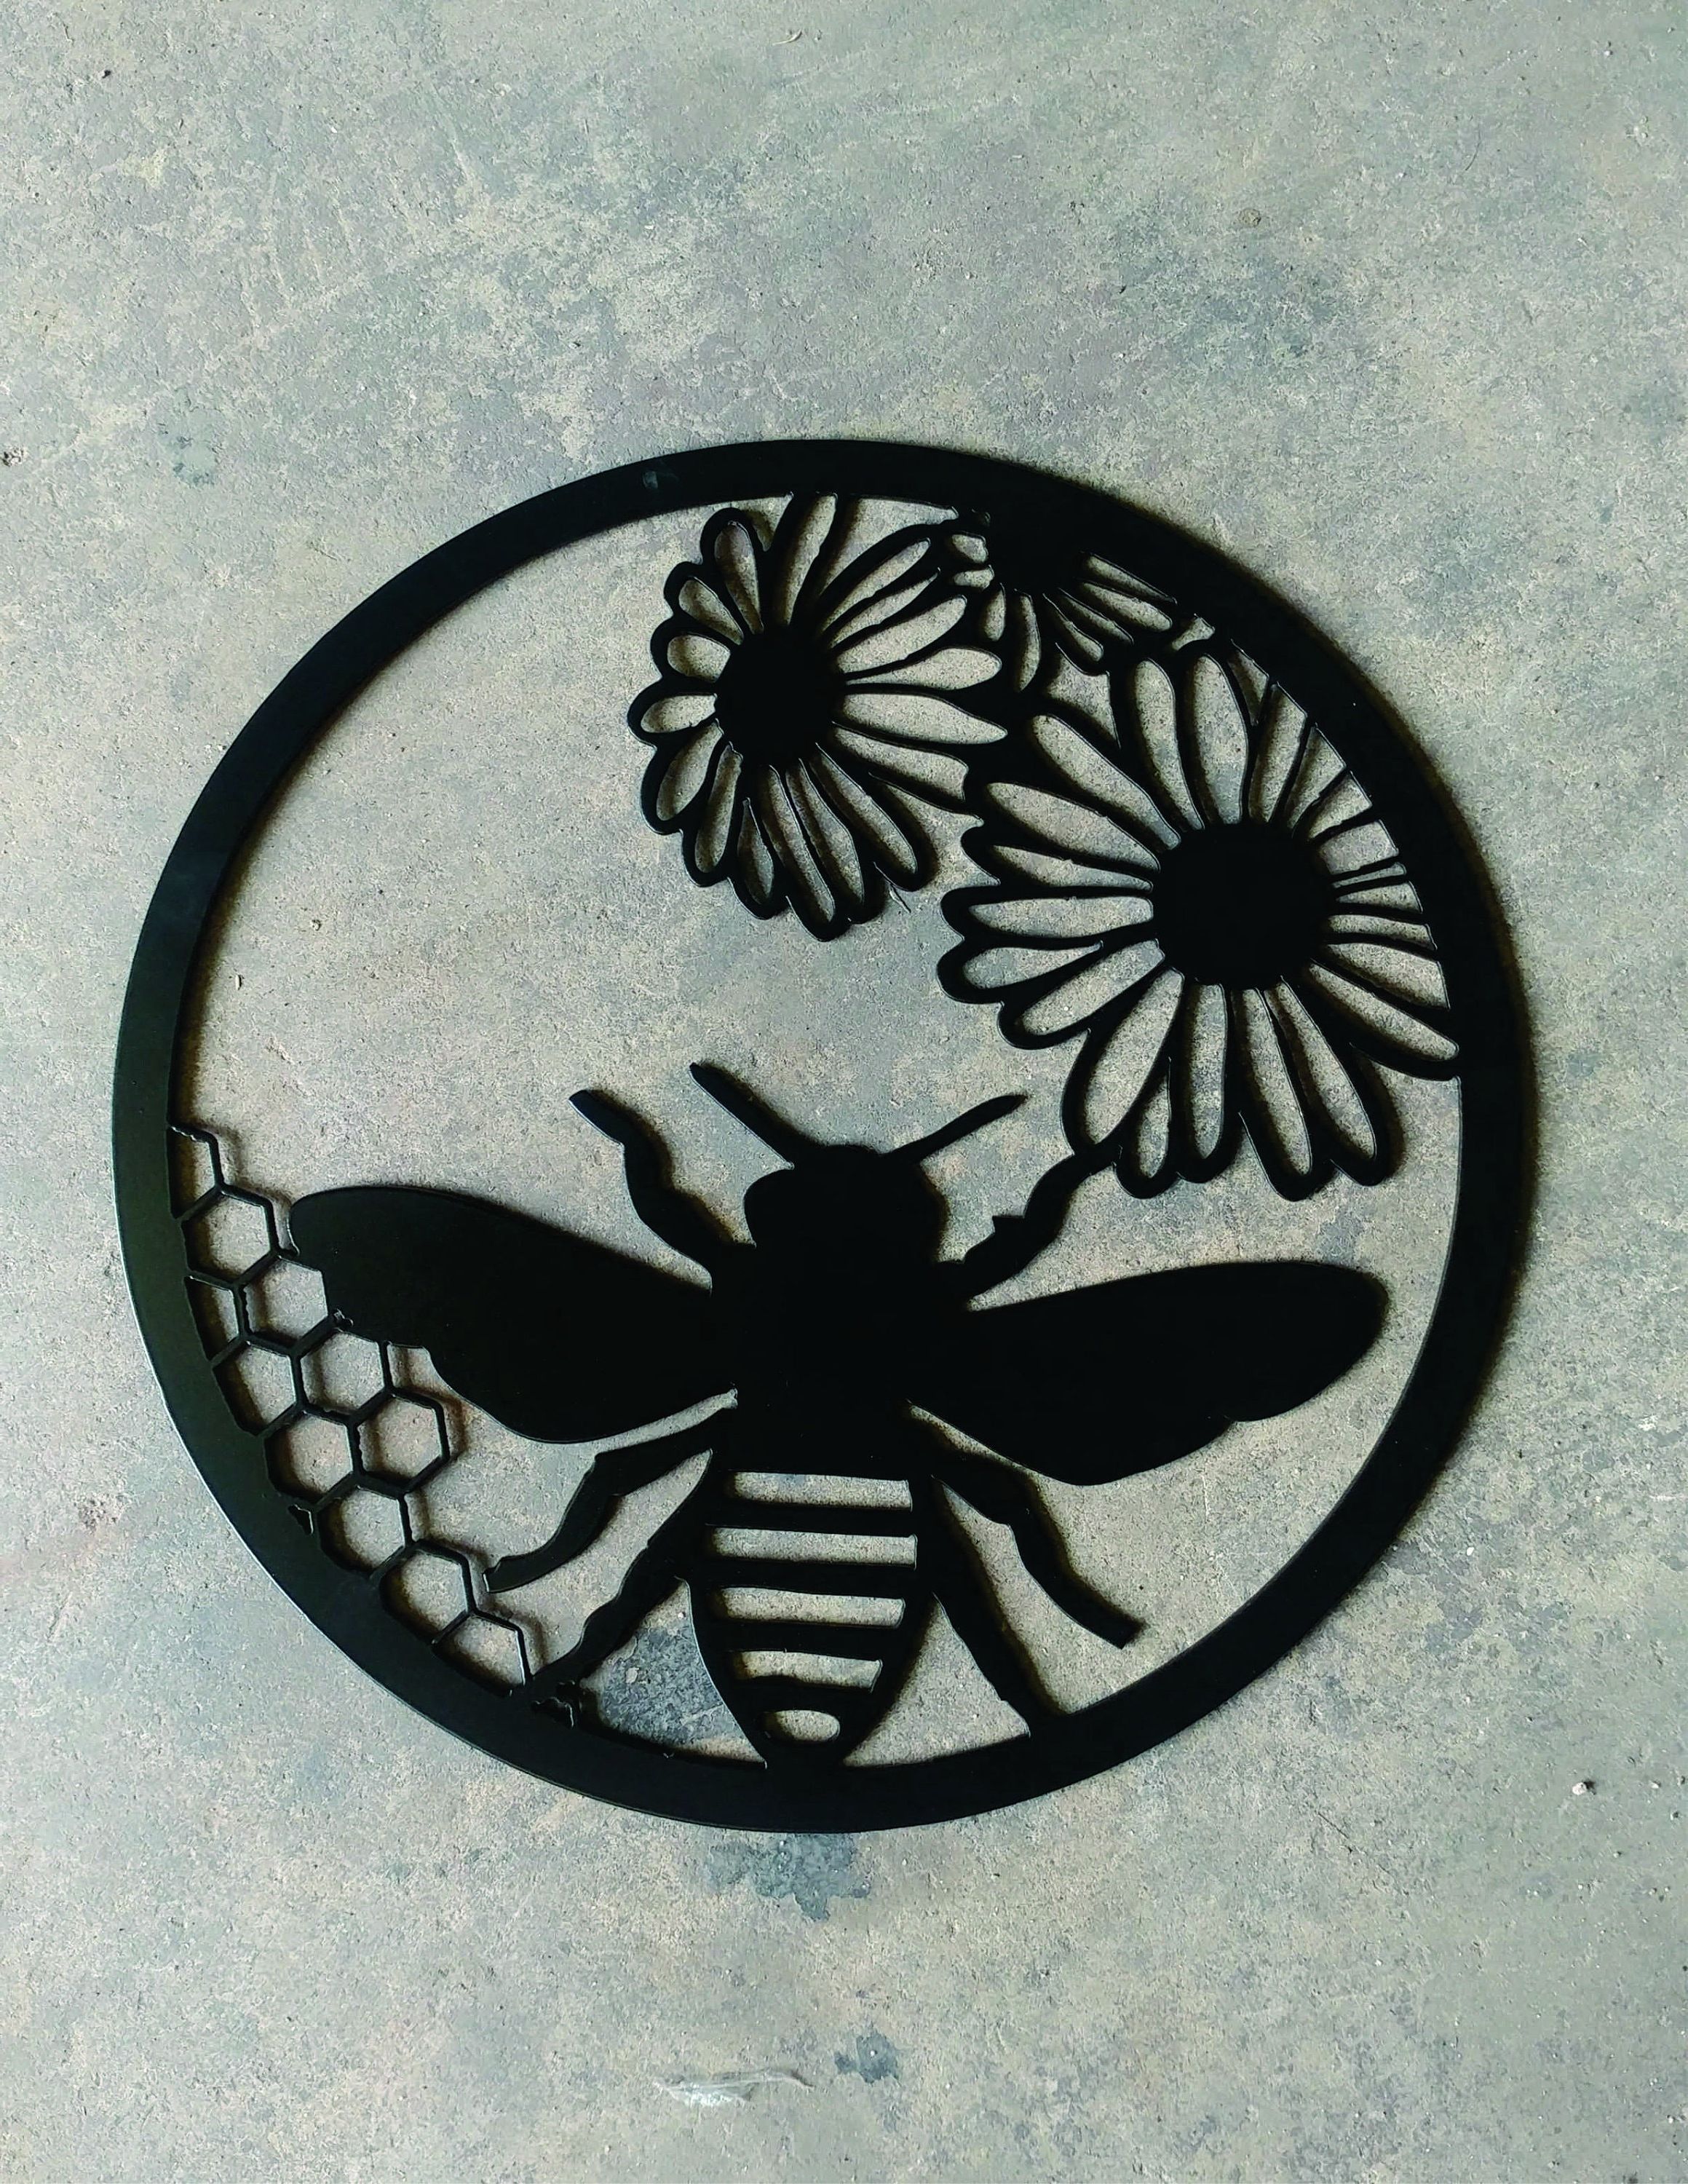 Metal Sign Stake Wall Art Throughout Latest Honey Bee Wall Art Or Yard Stake (View 7 of 15)